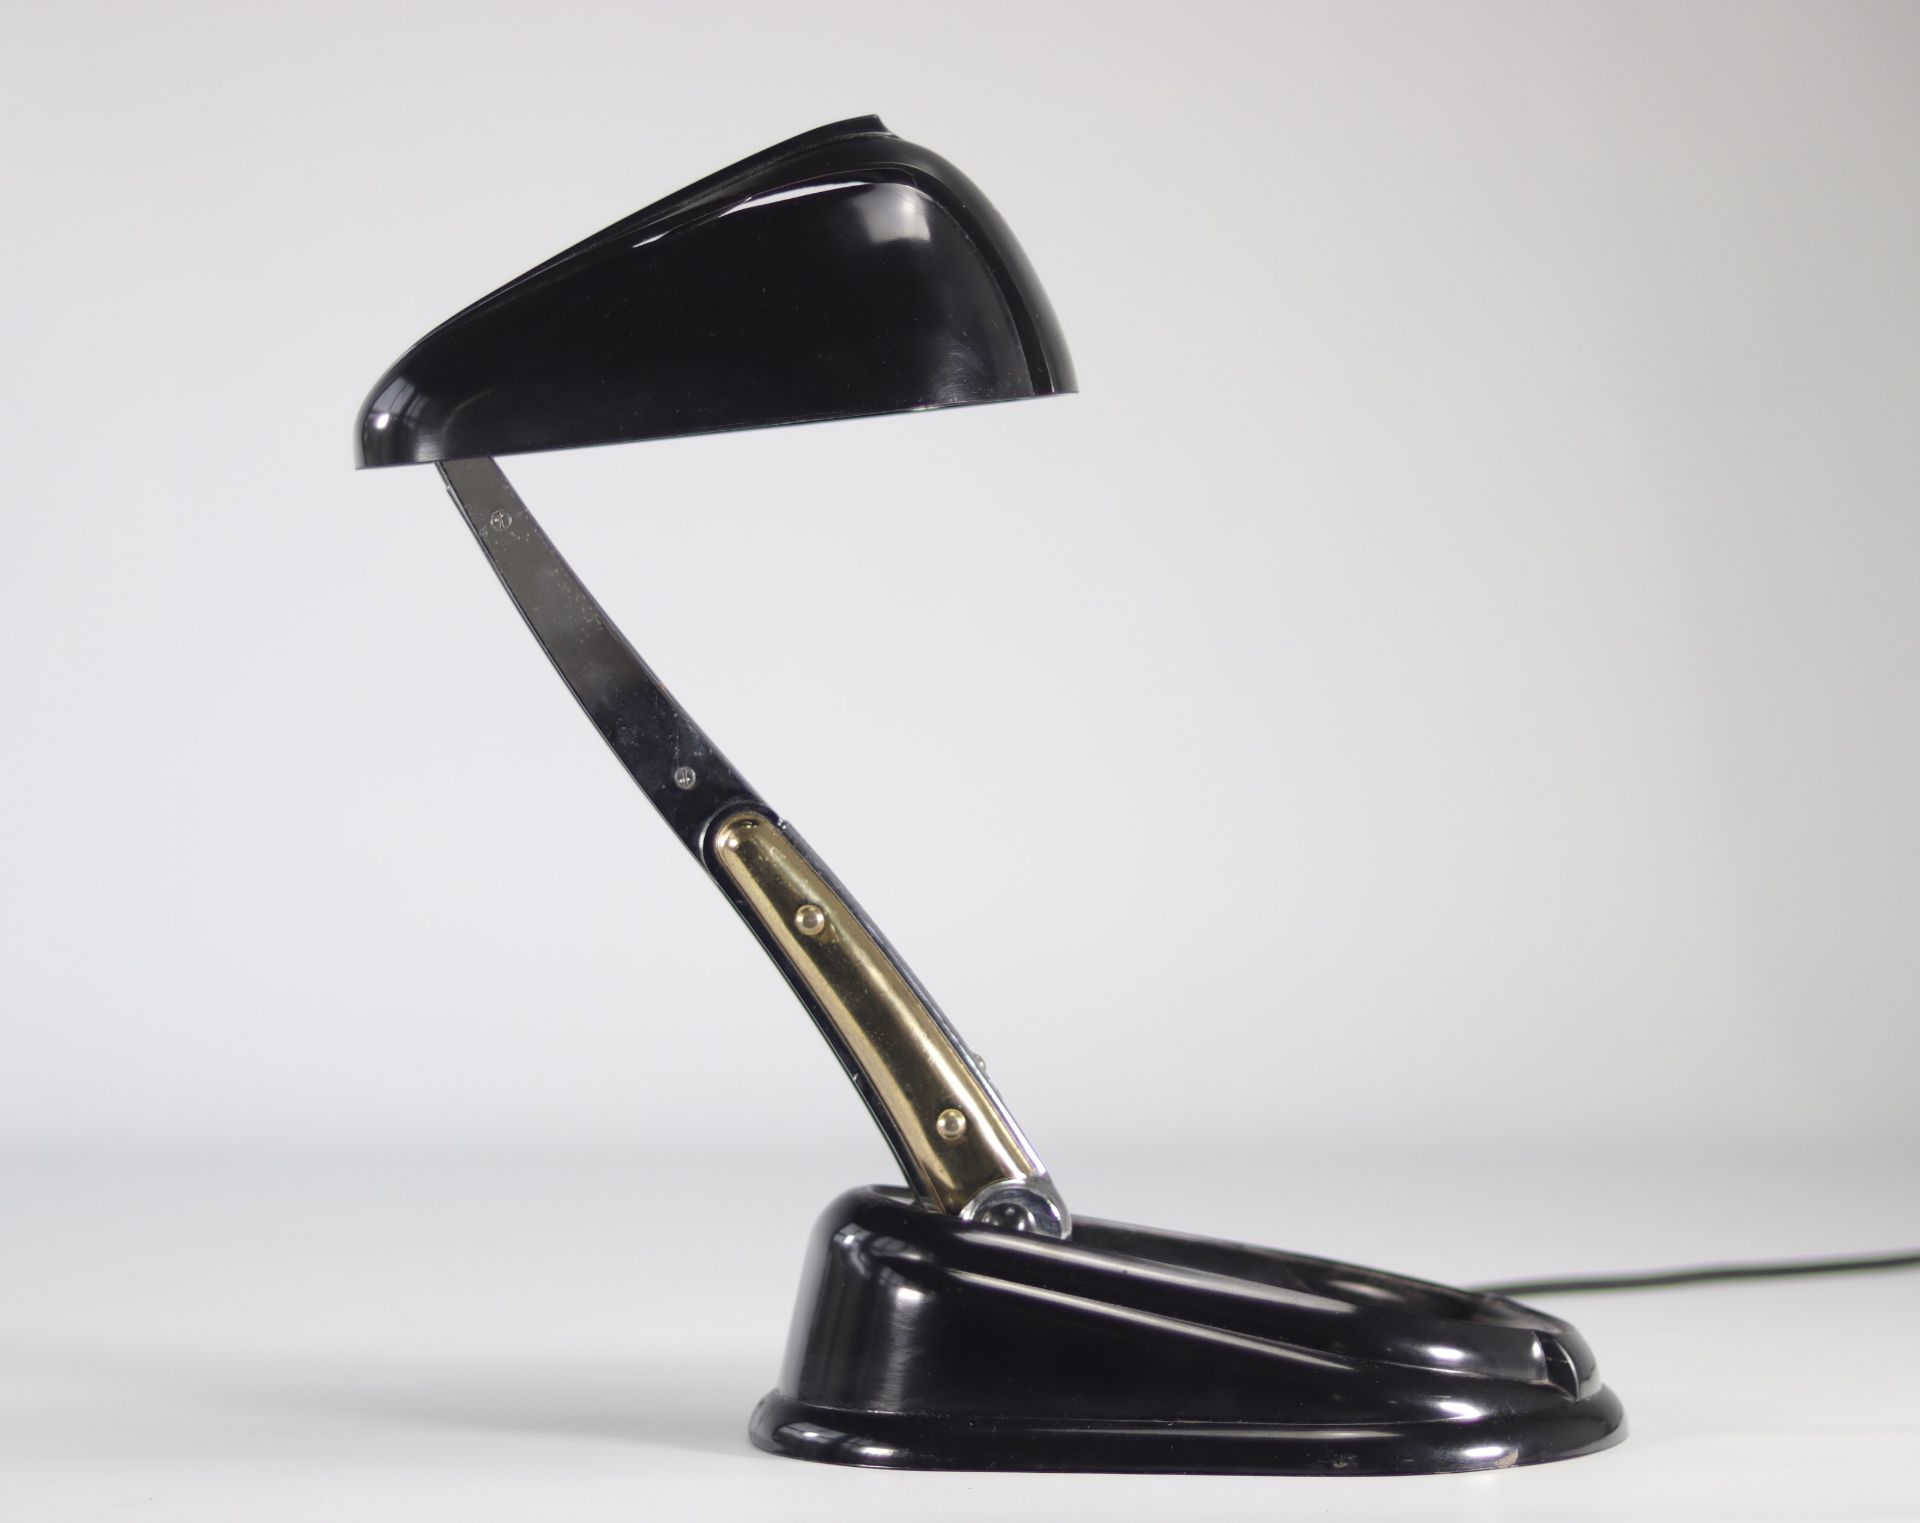 Jumo Articulated desk lamp with adjustable and retractable cap, bakelite model called "Bolide"